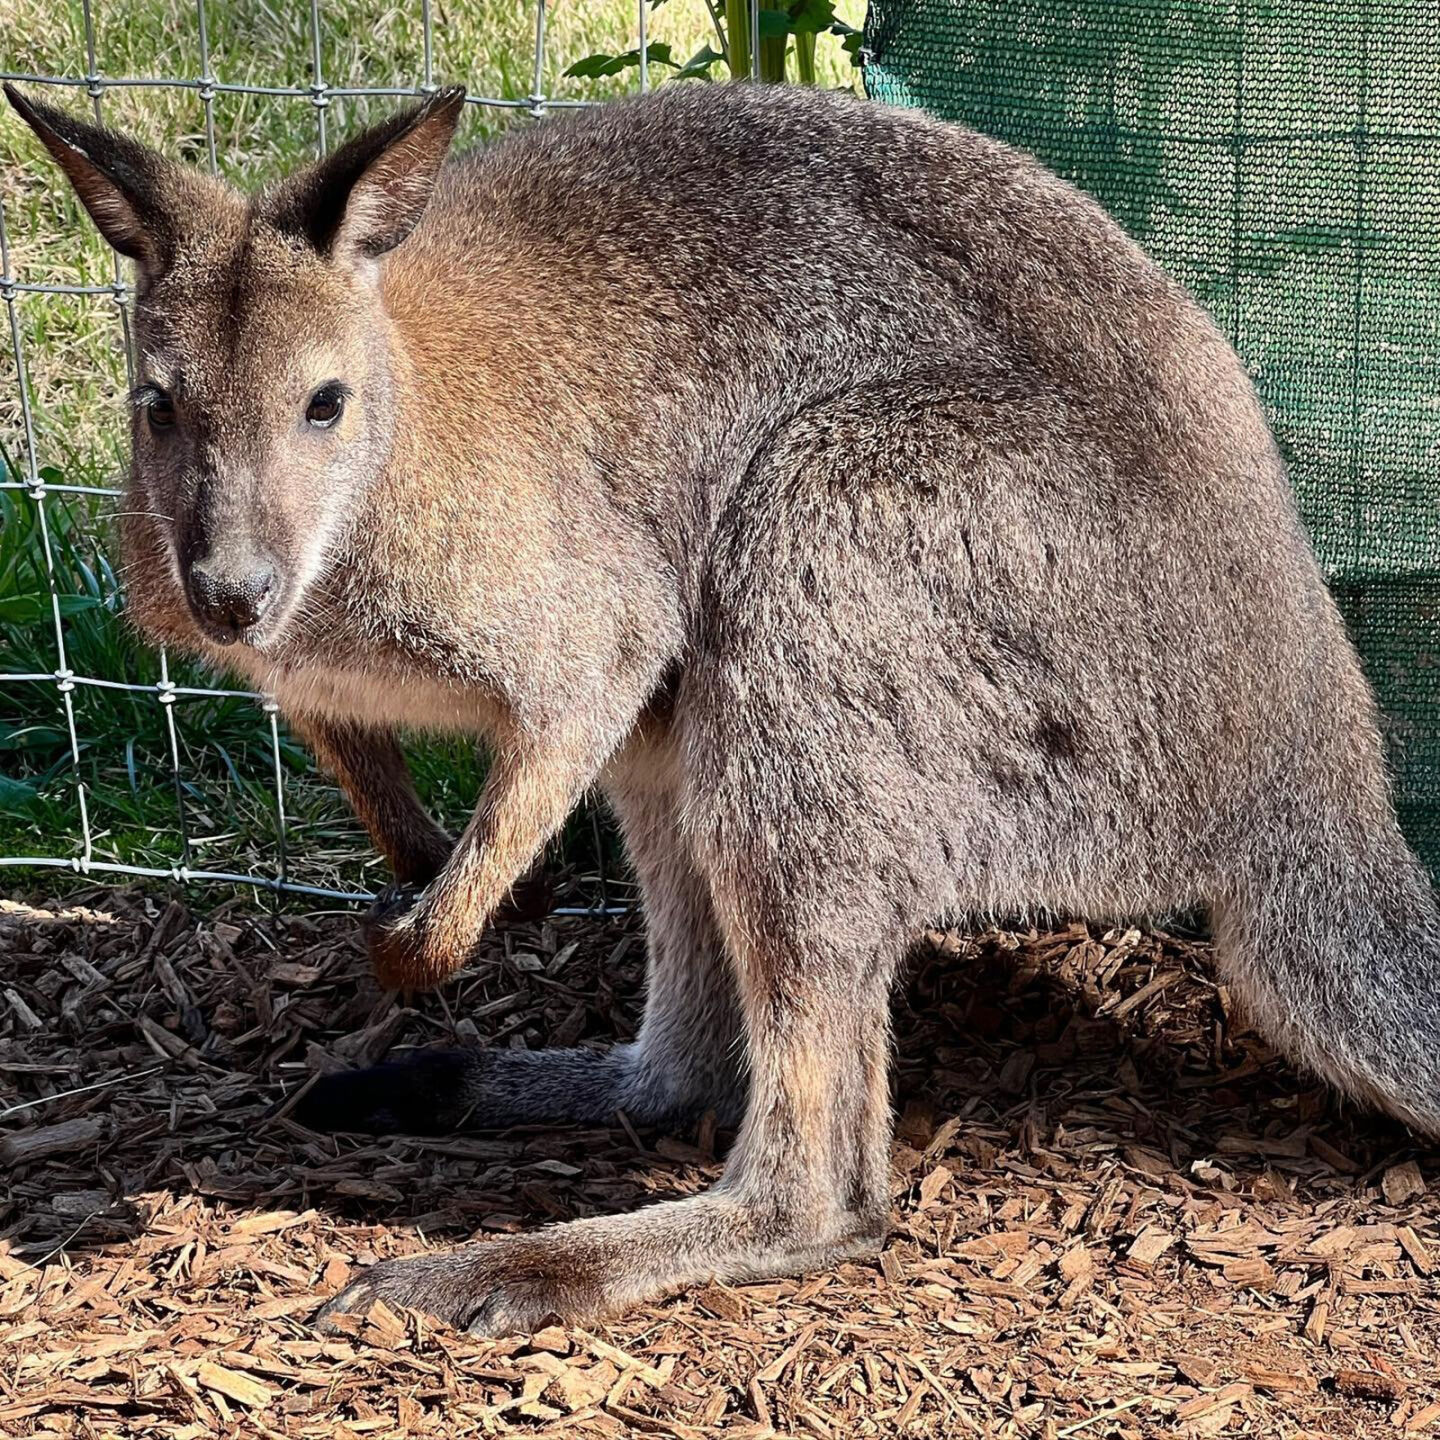 The Memphis Zoo had to rescue 19 kangaroos and 4 wallabies after storms caused a creek to overflow News wsiltv